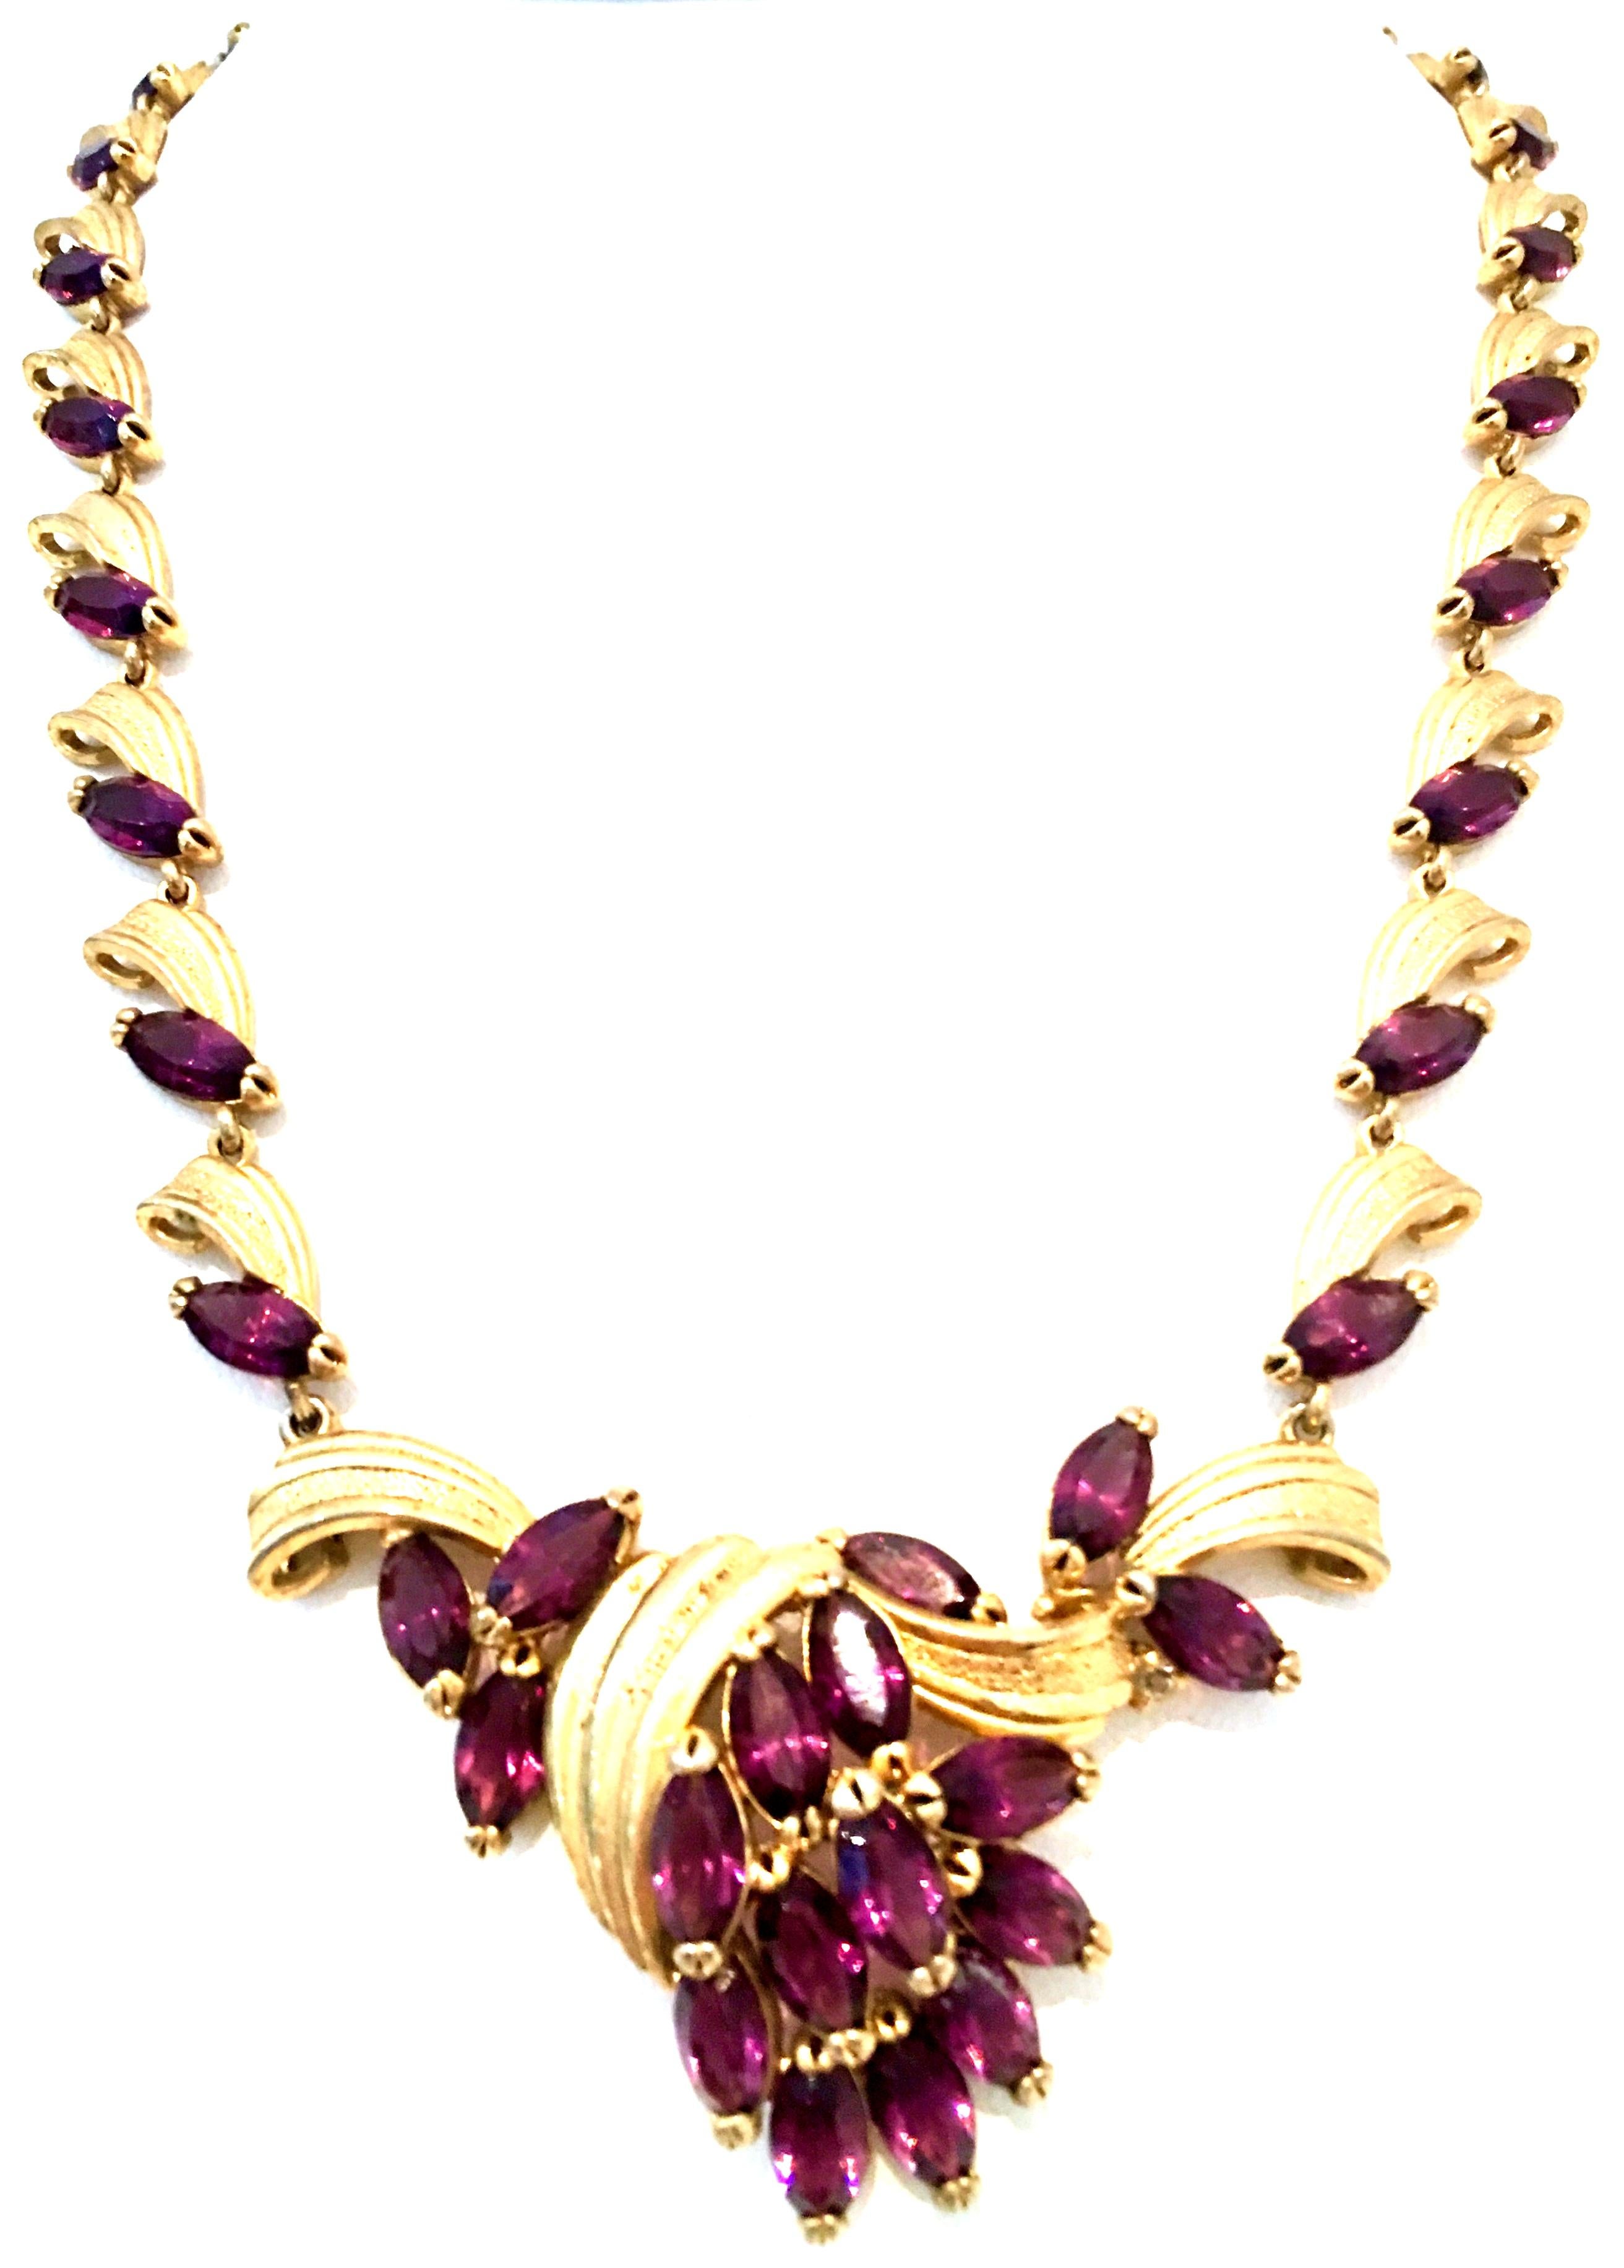 Mid-20th Century Gold & Amethyst Austrian Crystal Choker Style Link Necklace. This incredibly well crafted and dimensional gold plate link necklace features open back brilliant cut and faceted navette fancy prong set amethyst stones. There are